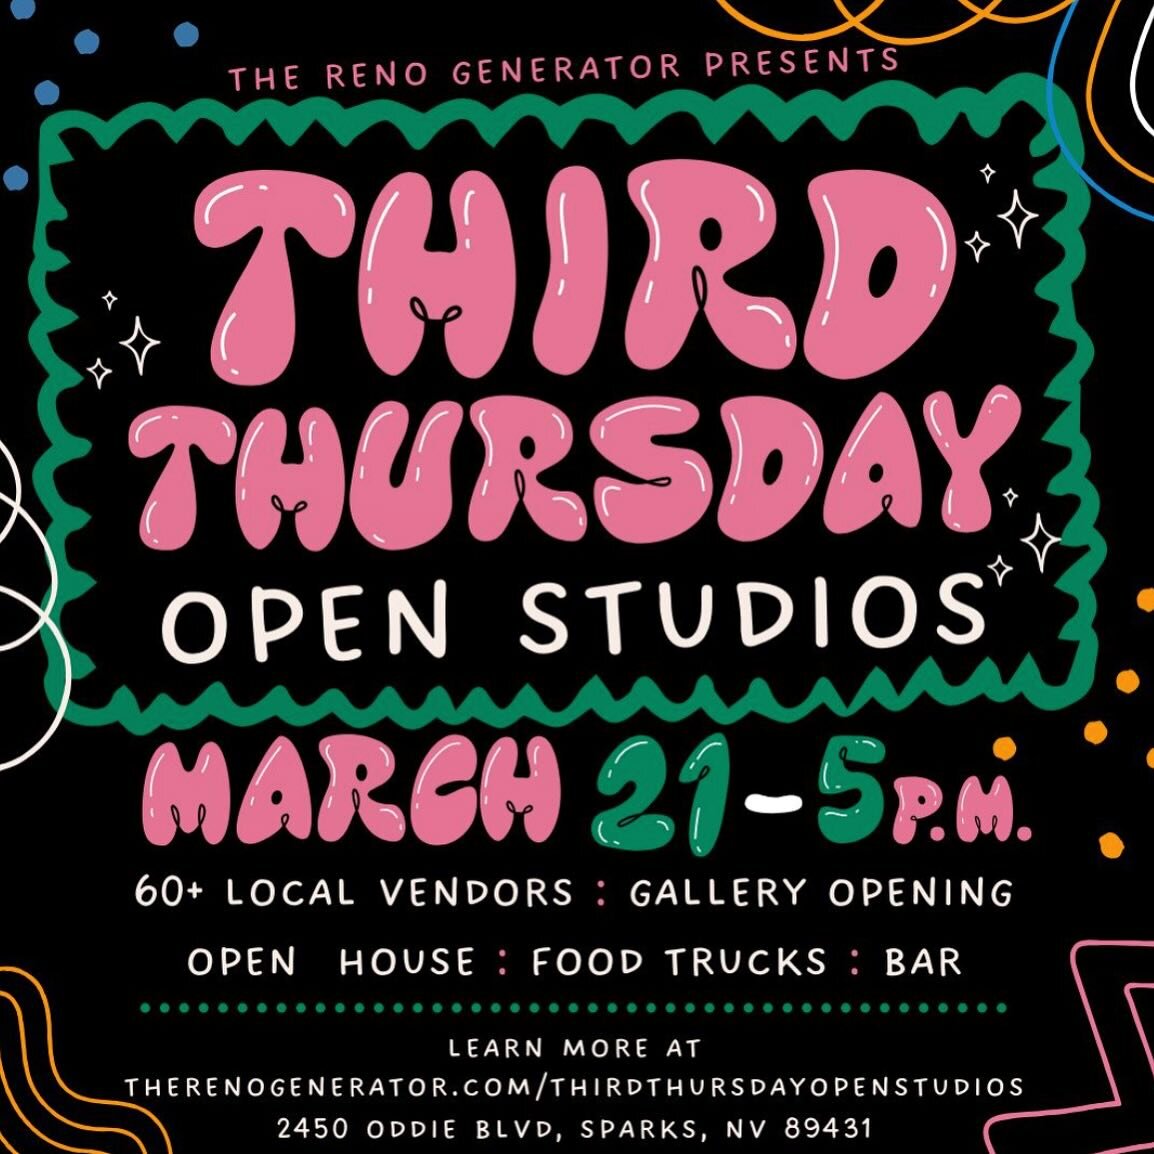 1 week countdown! Next Thursday, March 21st, we&rsquo;ll be showcasing a few new projects as well as our latest collection of Green Walls. Swing by the @renogenerator between 5-8PM and support local artists and makers! #maker #renosmallbusiness #bigg